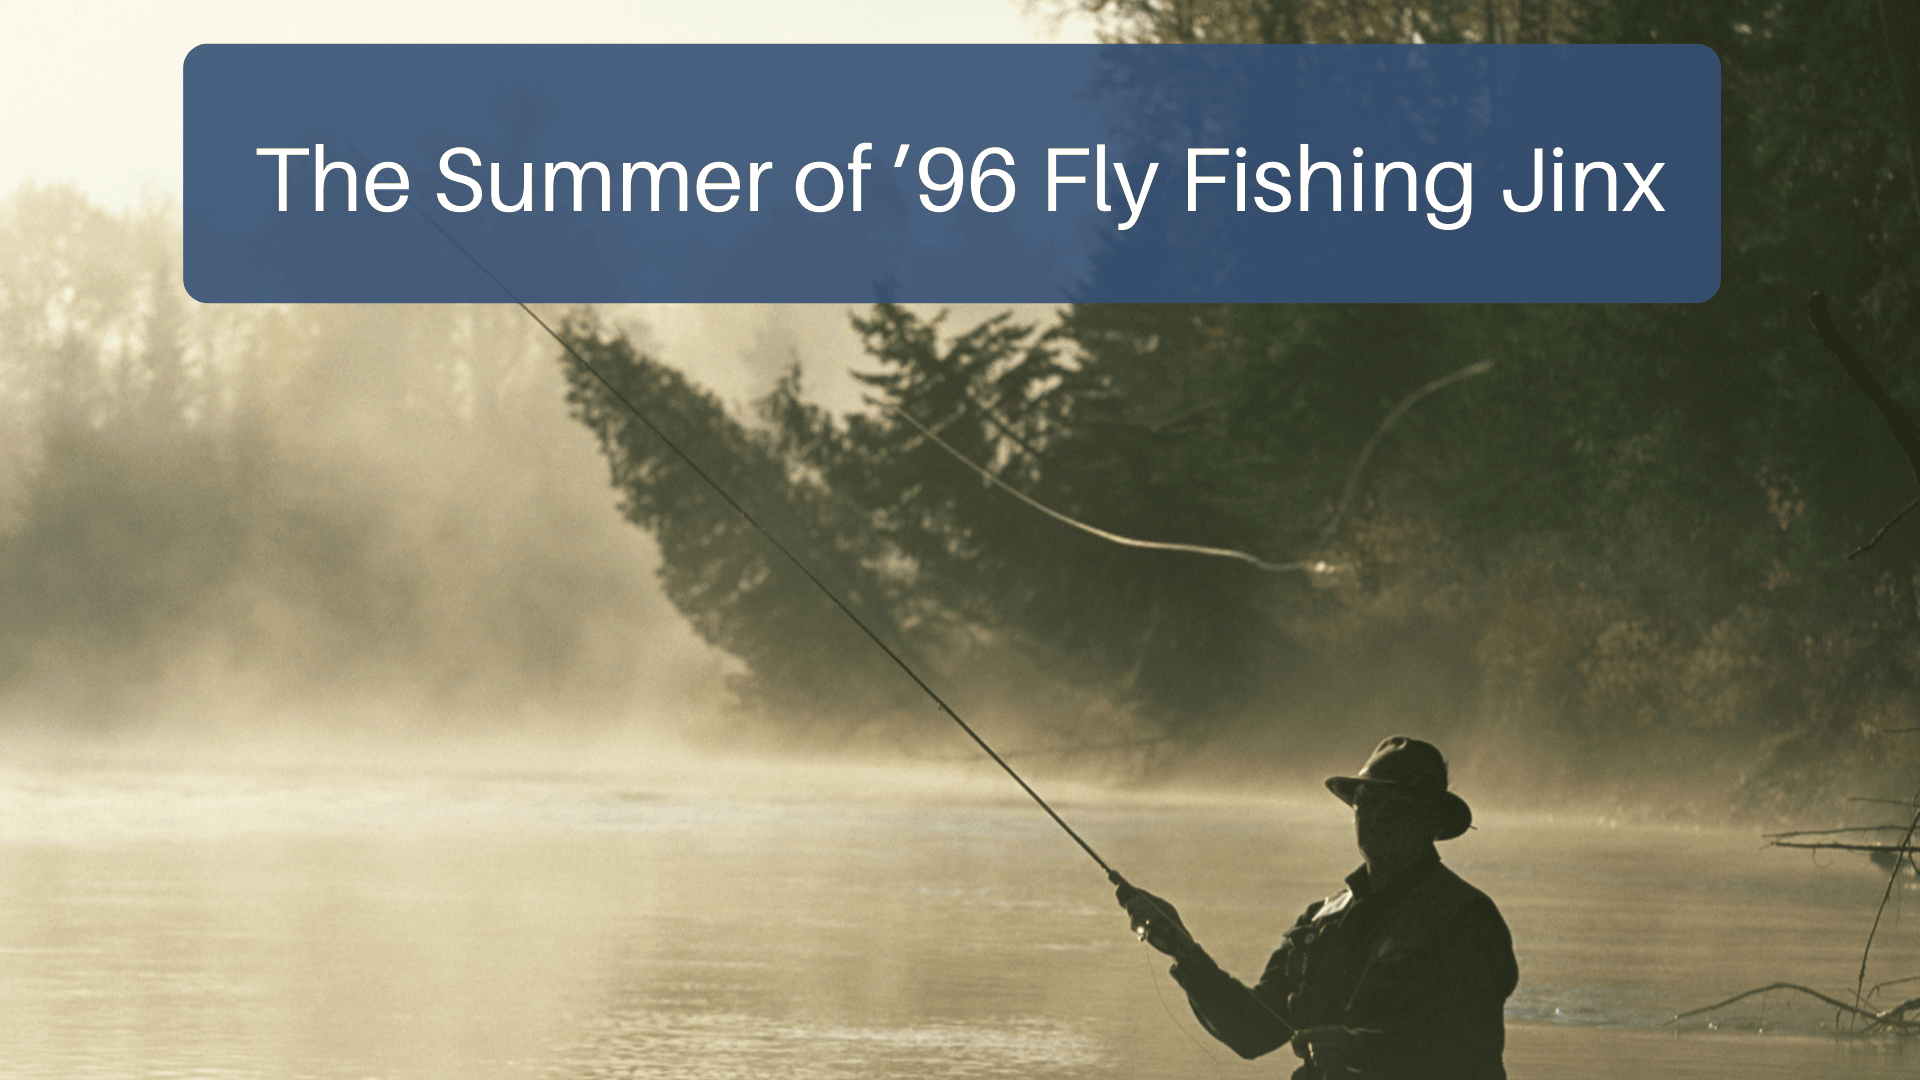 The Summer of ’96 Fly Fishing Jinx